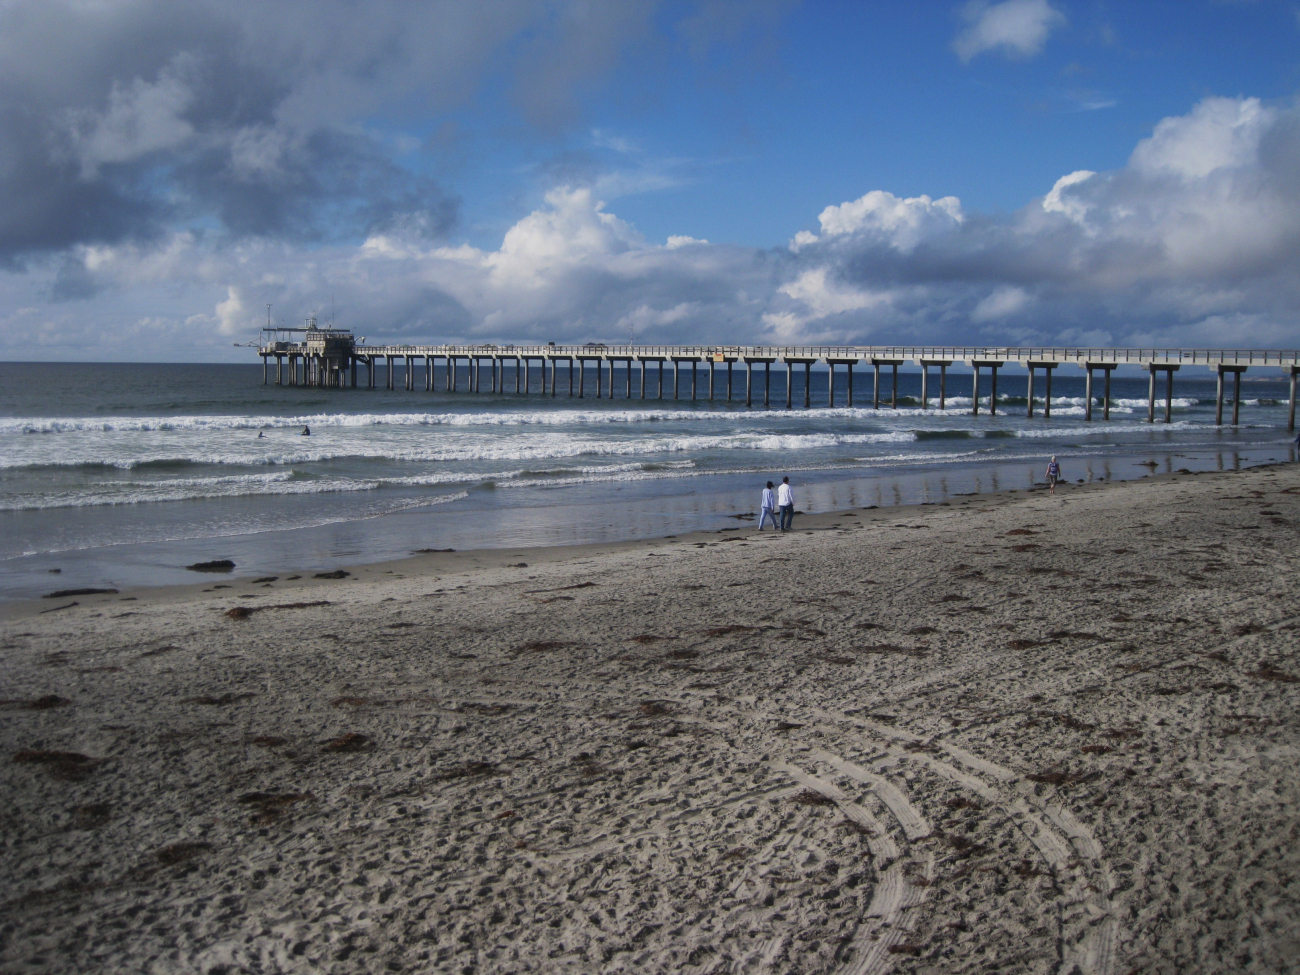 The research pier at Scripps Institution of Oceanography